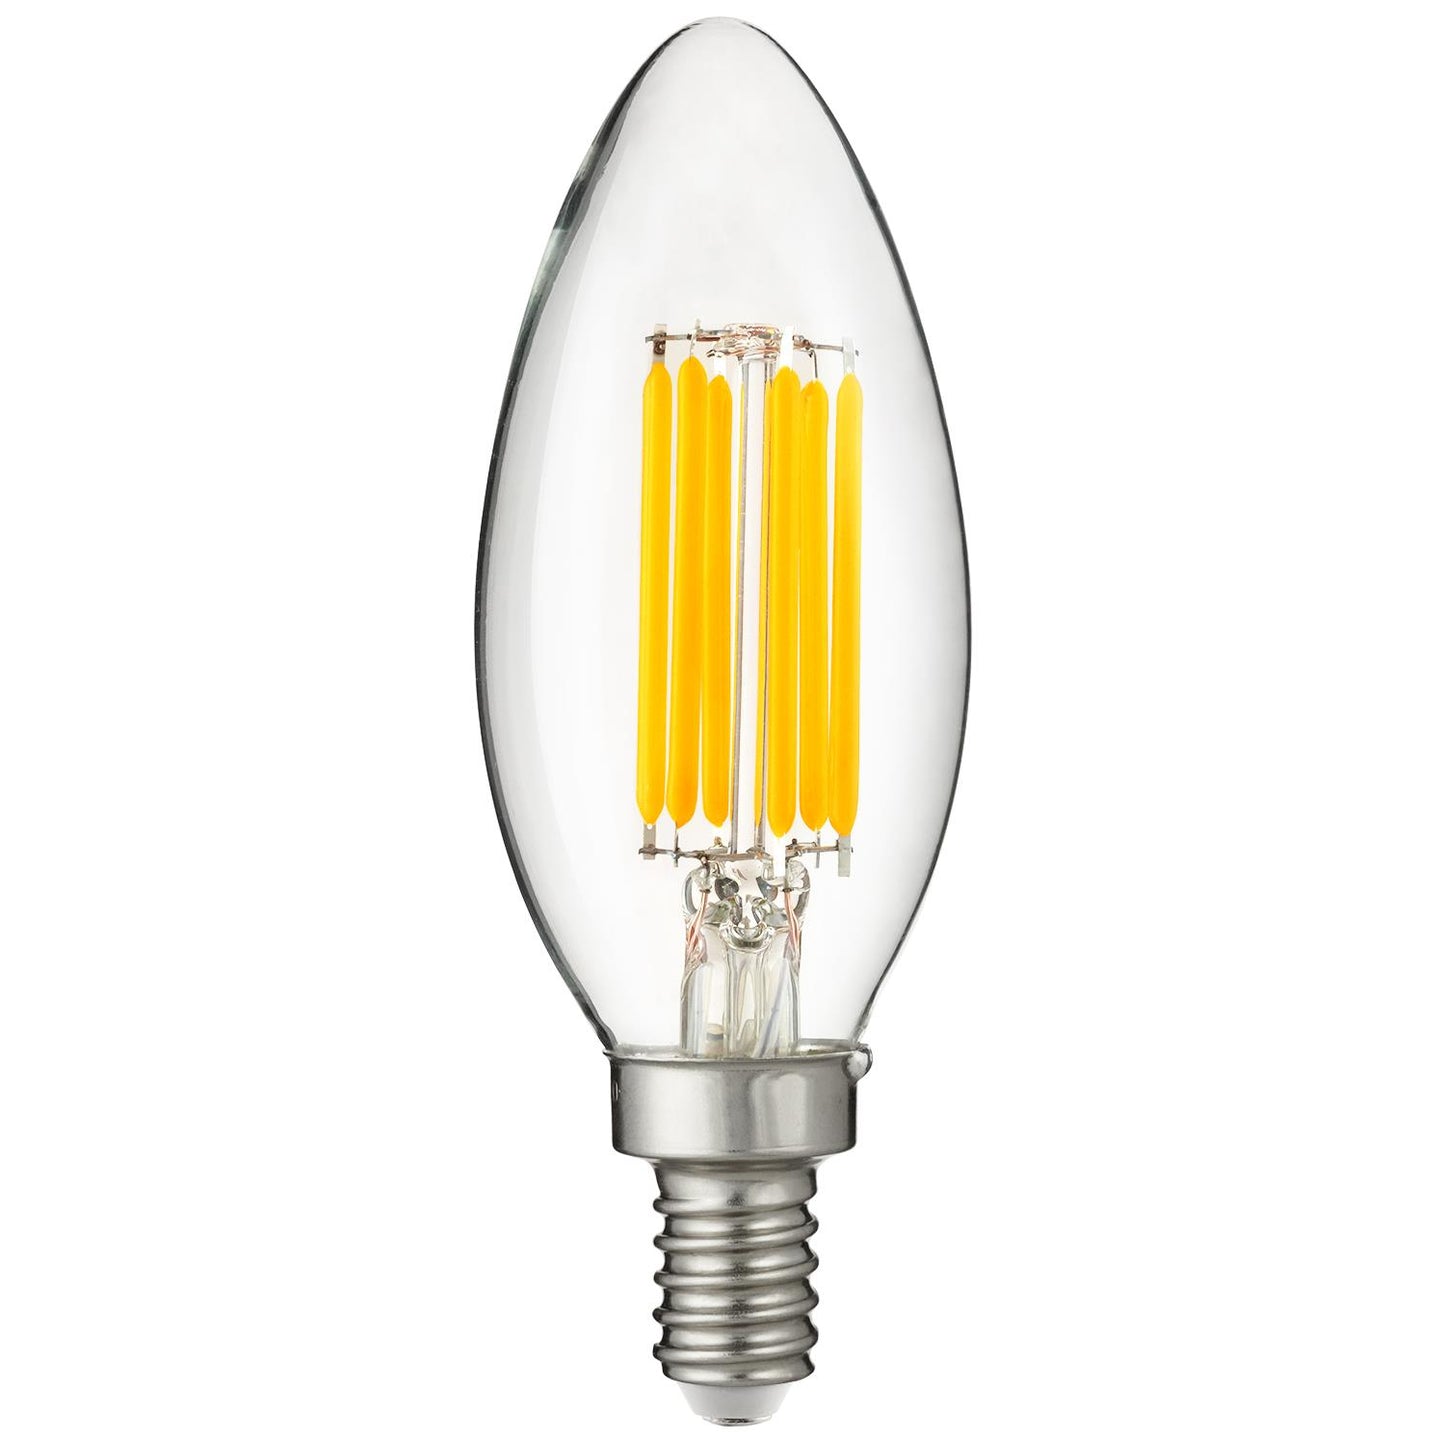 Sunlite 81111-SU LED Filament Chandelier Bulb with Torpedo Tip, 5 Watts (60W Equivalent), Candelabra Base (E12), Clear, Dimmable, 50K - Super White 1 Pack